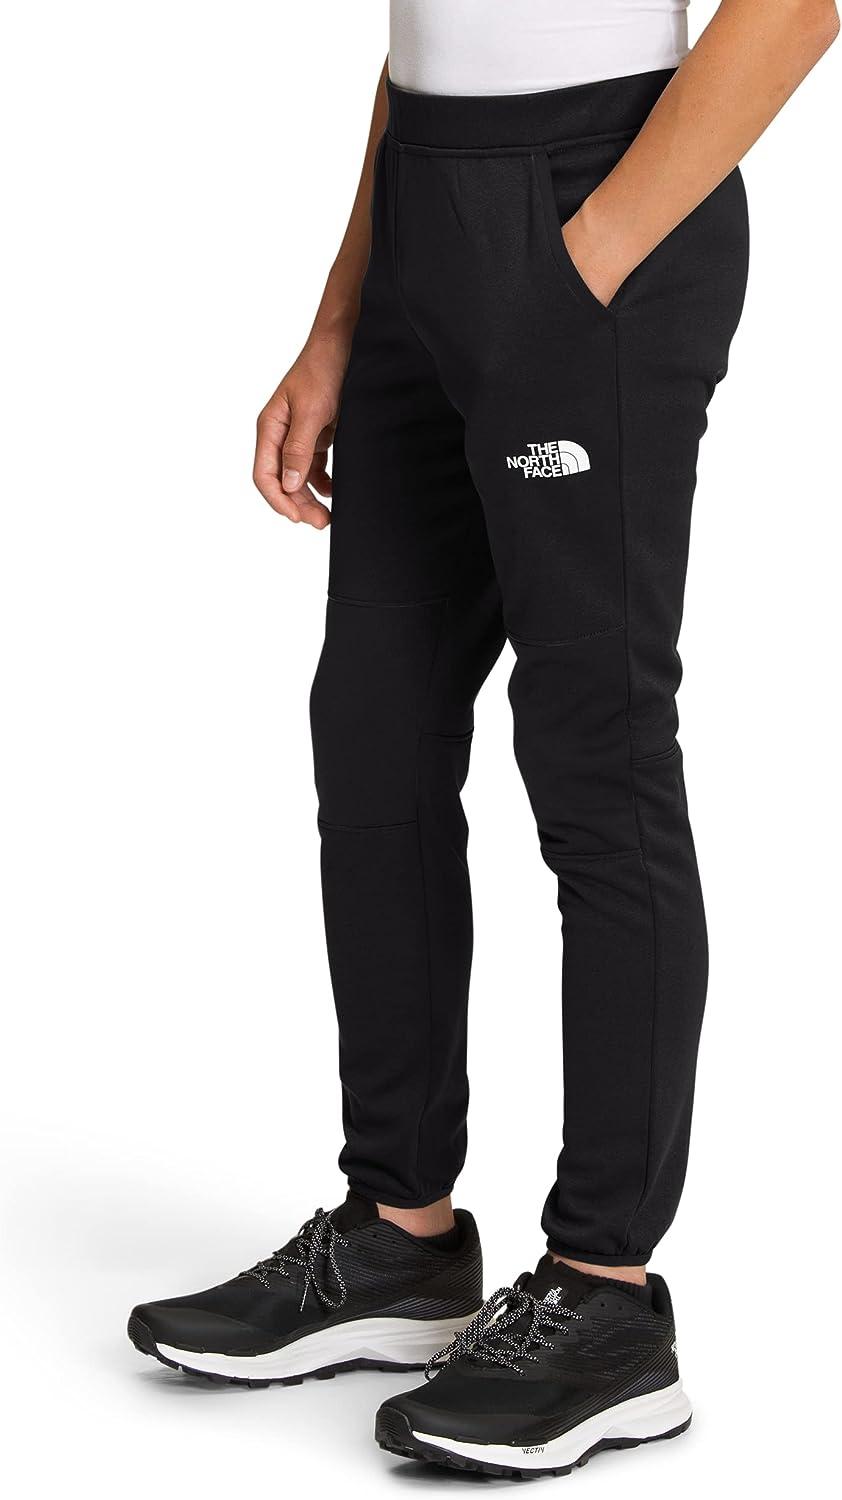 The North Face Winter Warm Pants - Boys